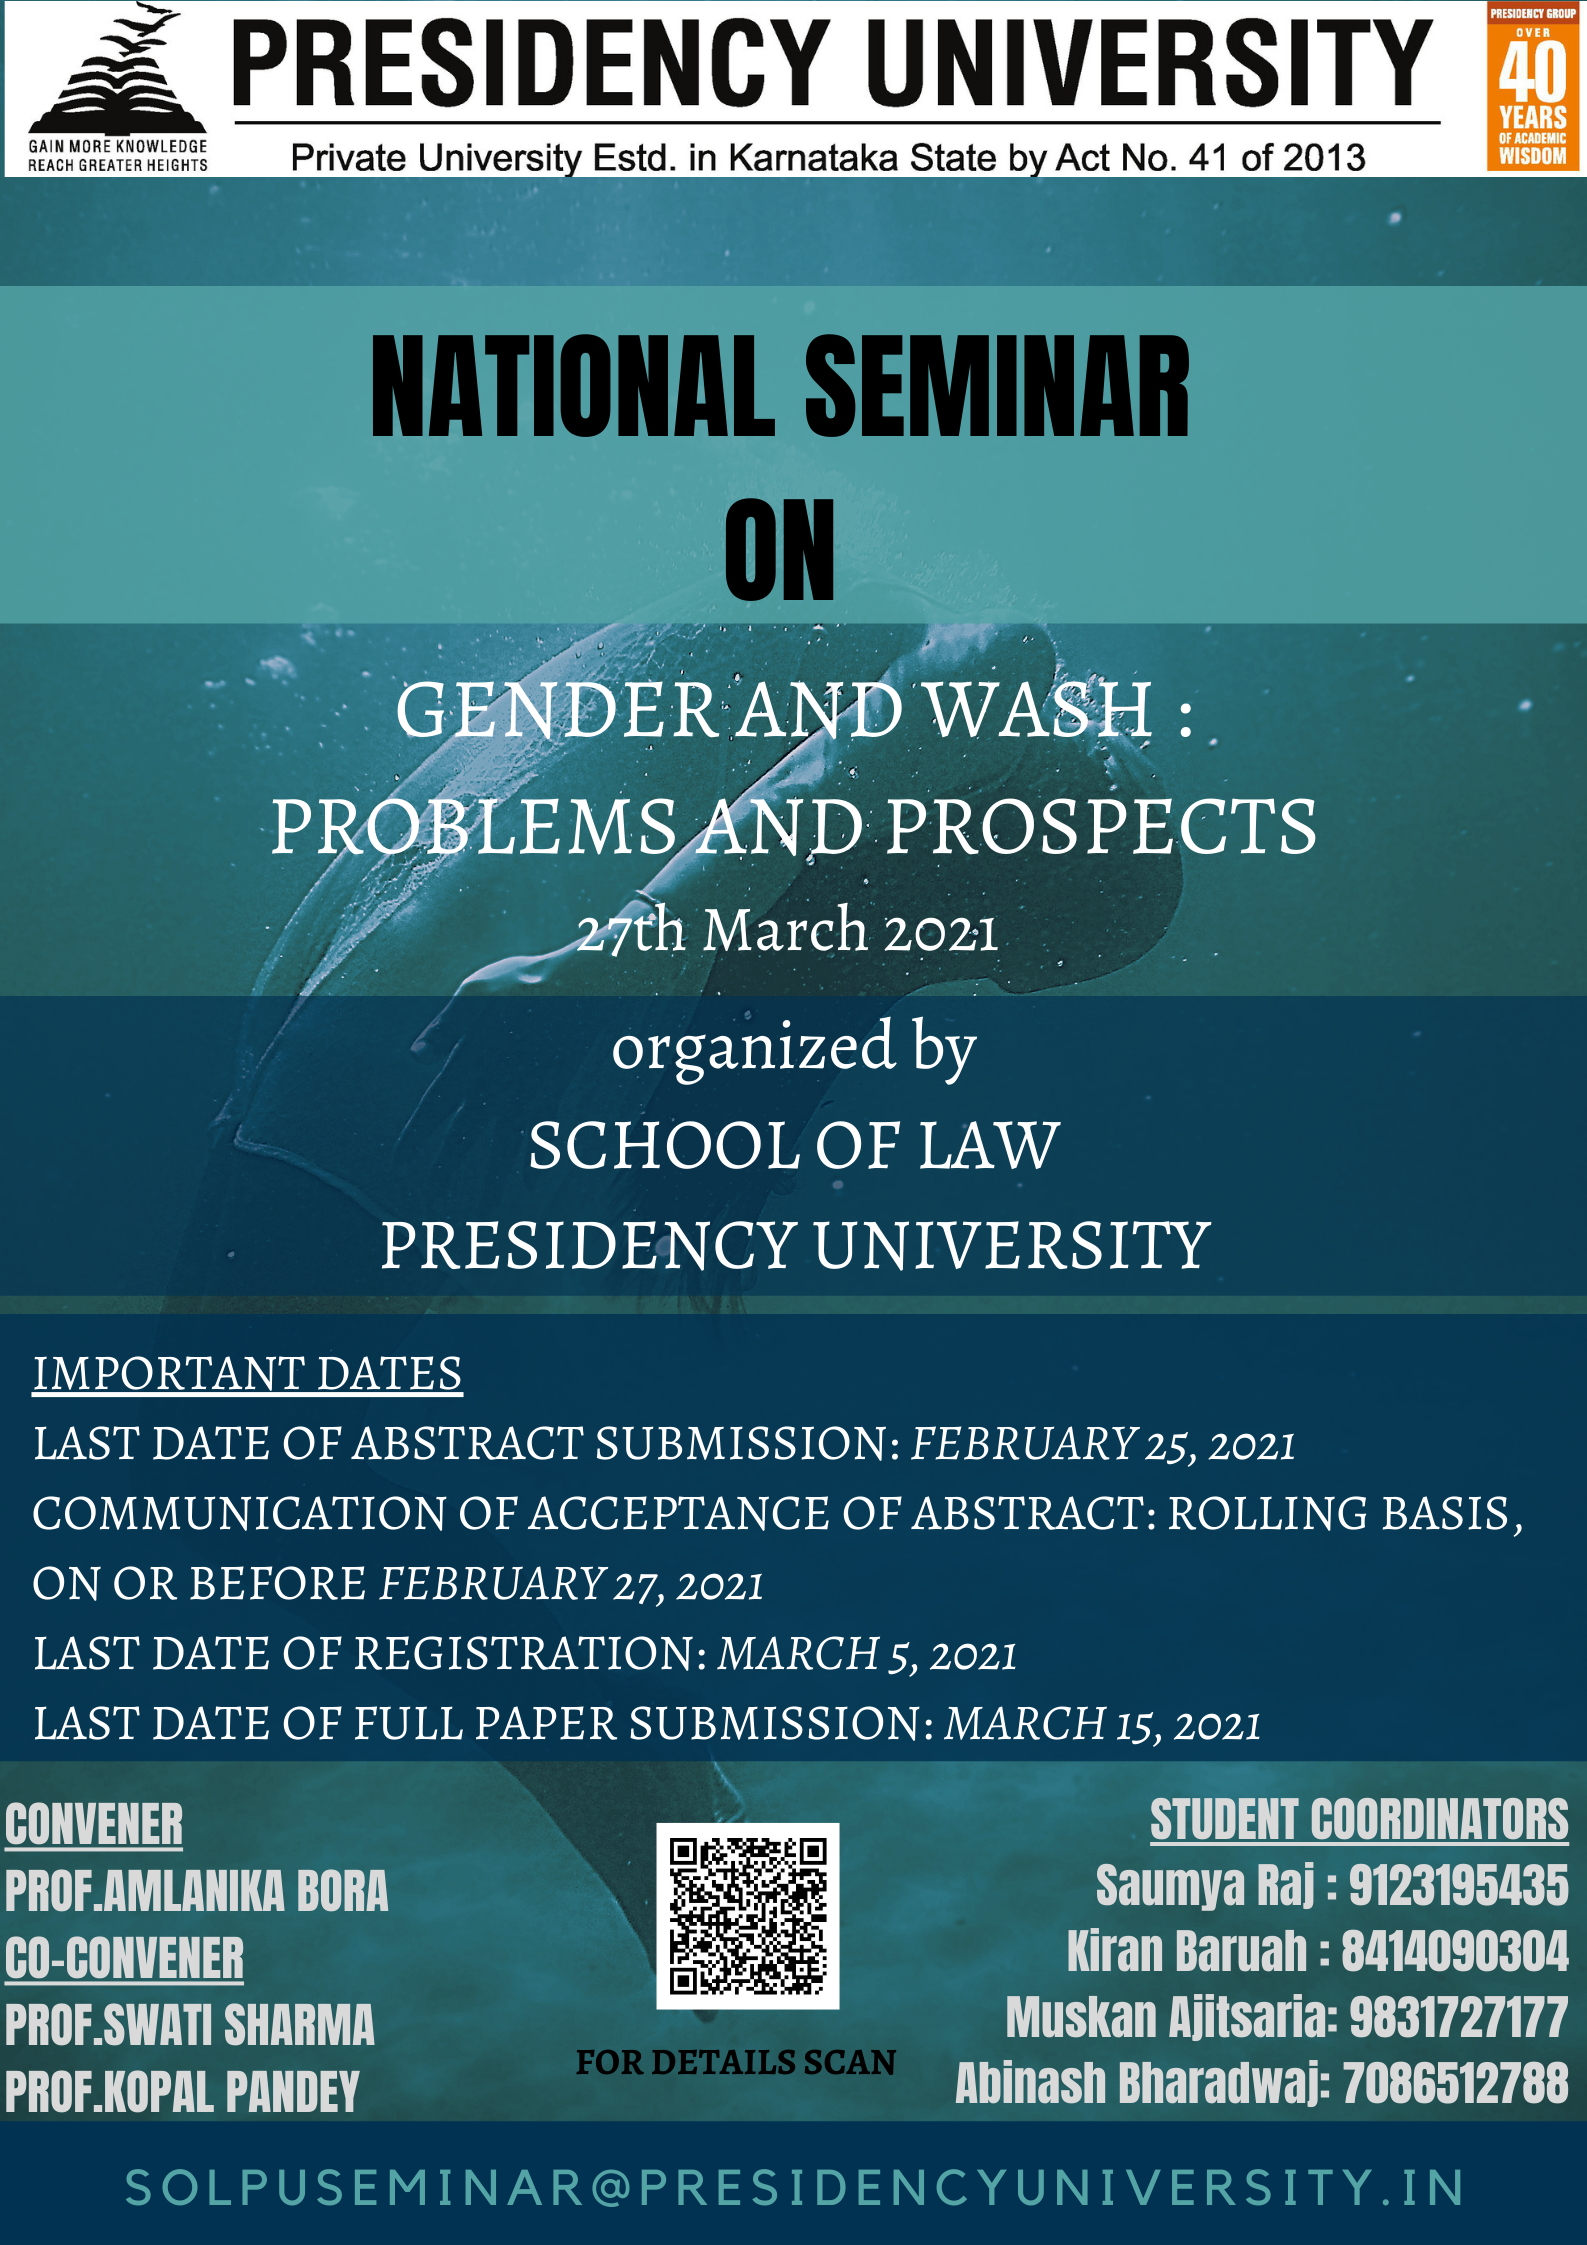 National Seminar on “Gender and Wash: Problems and Prospects” on March 27, 2021, by Presidency University.